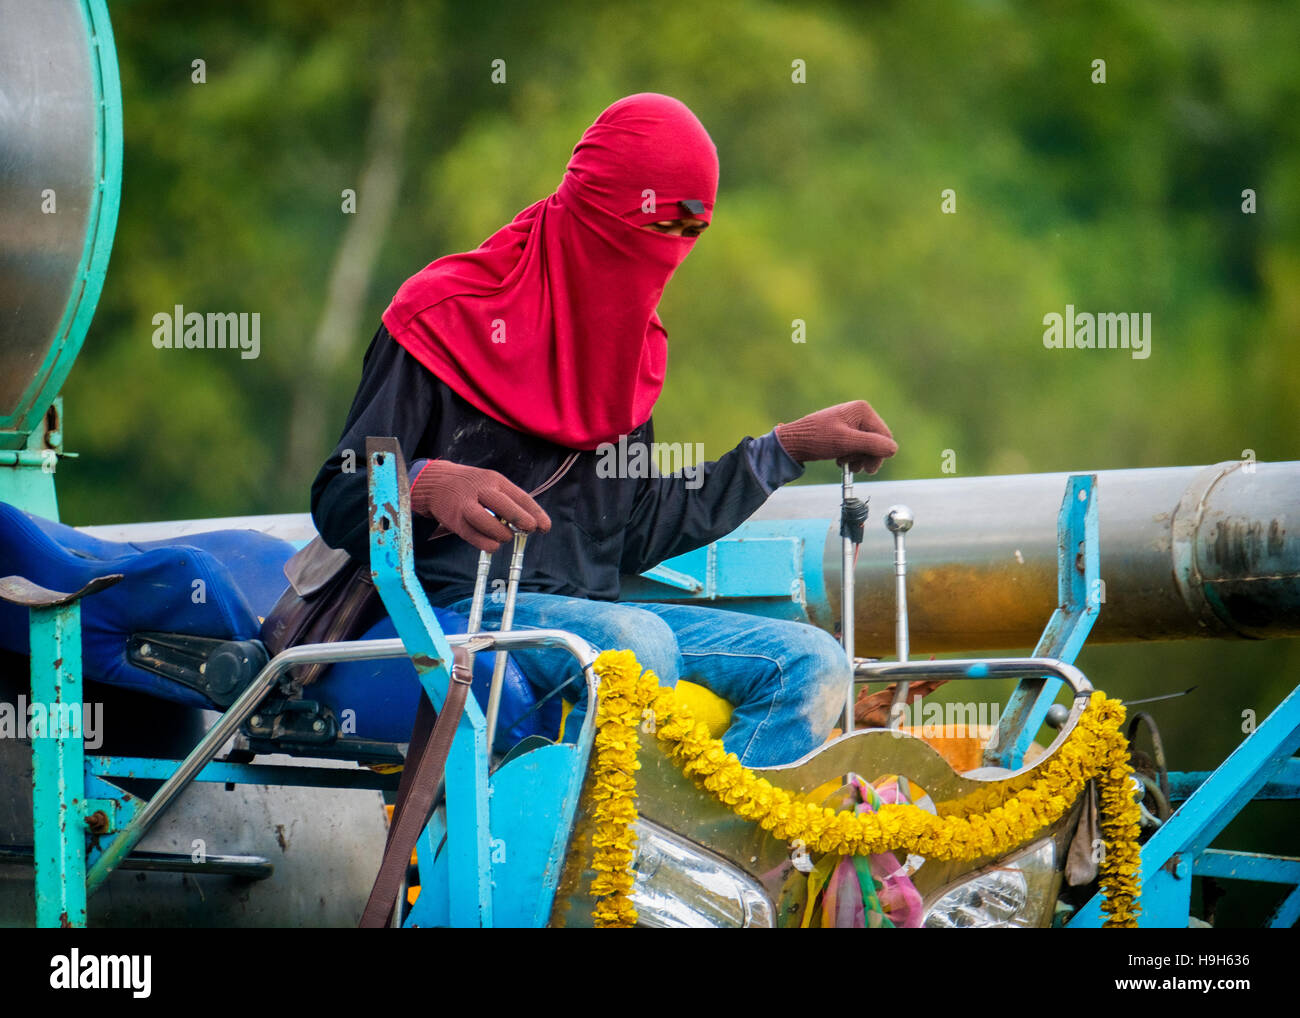 Nakhon Nayok, Thailand. 23rd Nov, 2016. Rice prices are at a 13 month low, creating hardships for Thailand's rice farmers as a colorfully dressed machine operator harvests rice in rural Thailand. Credit:  Lee Craker/Alamy Live News Stock Photo